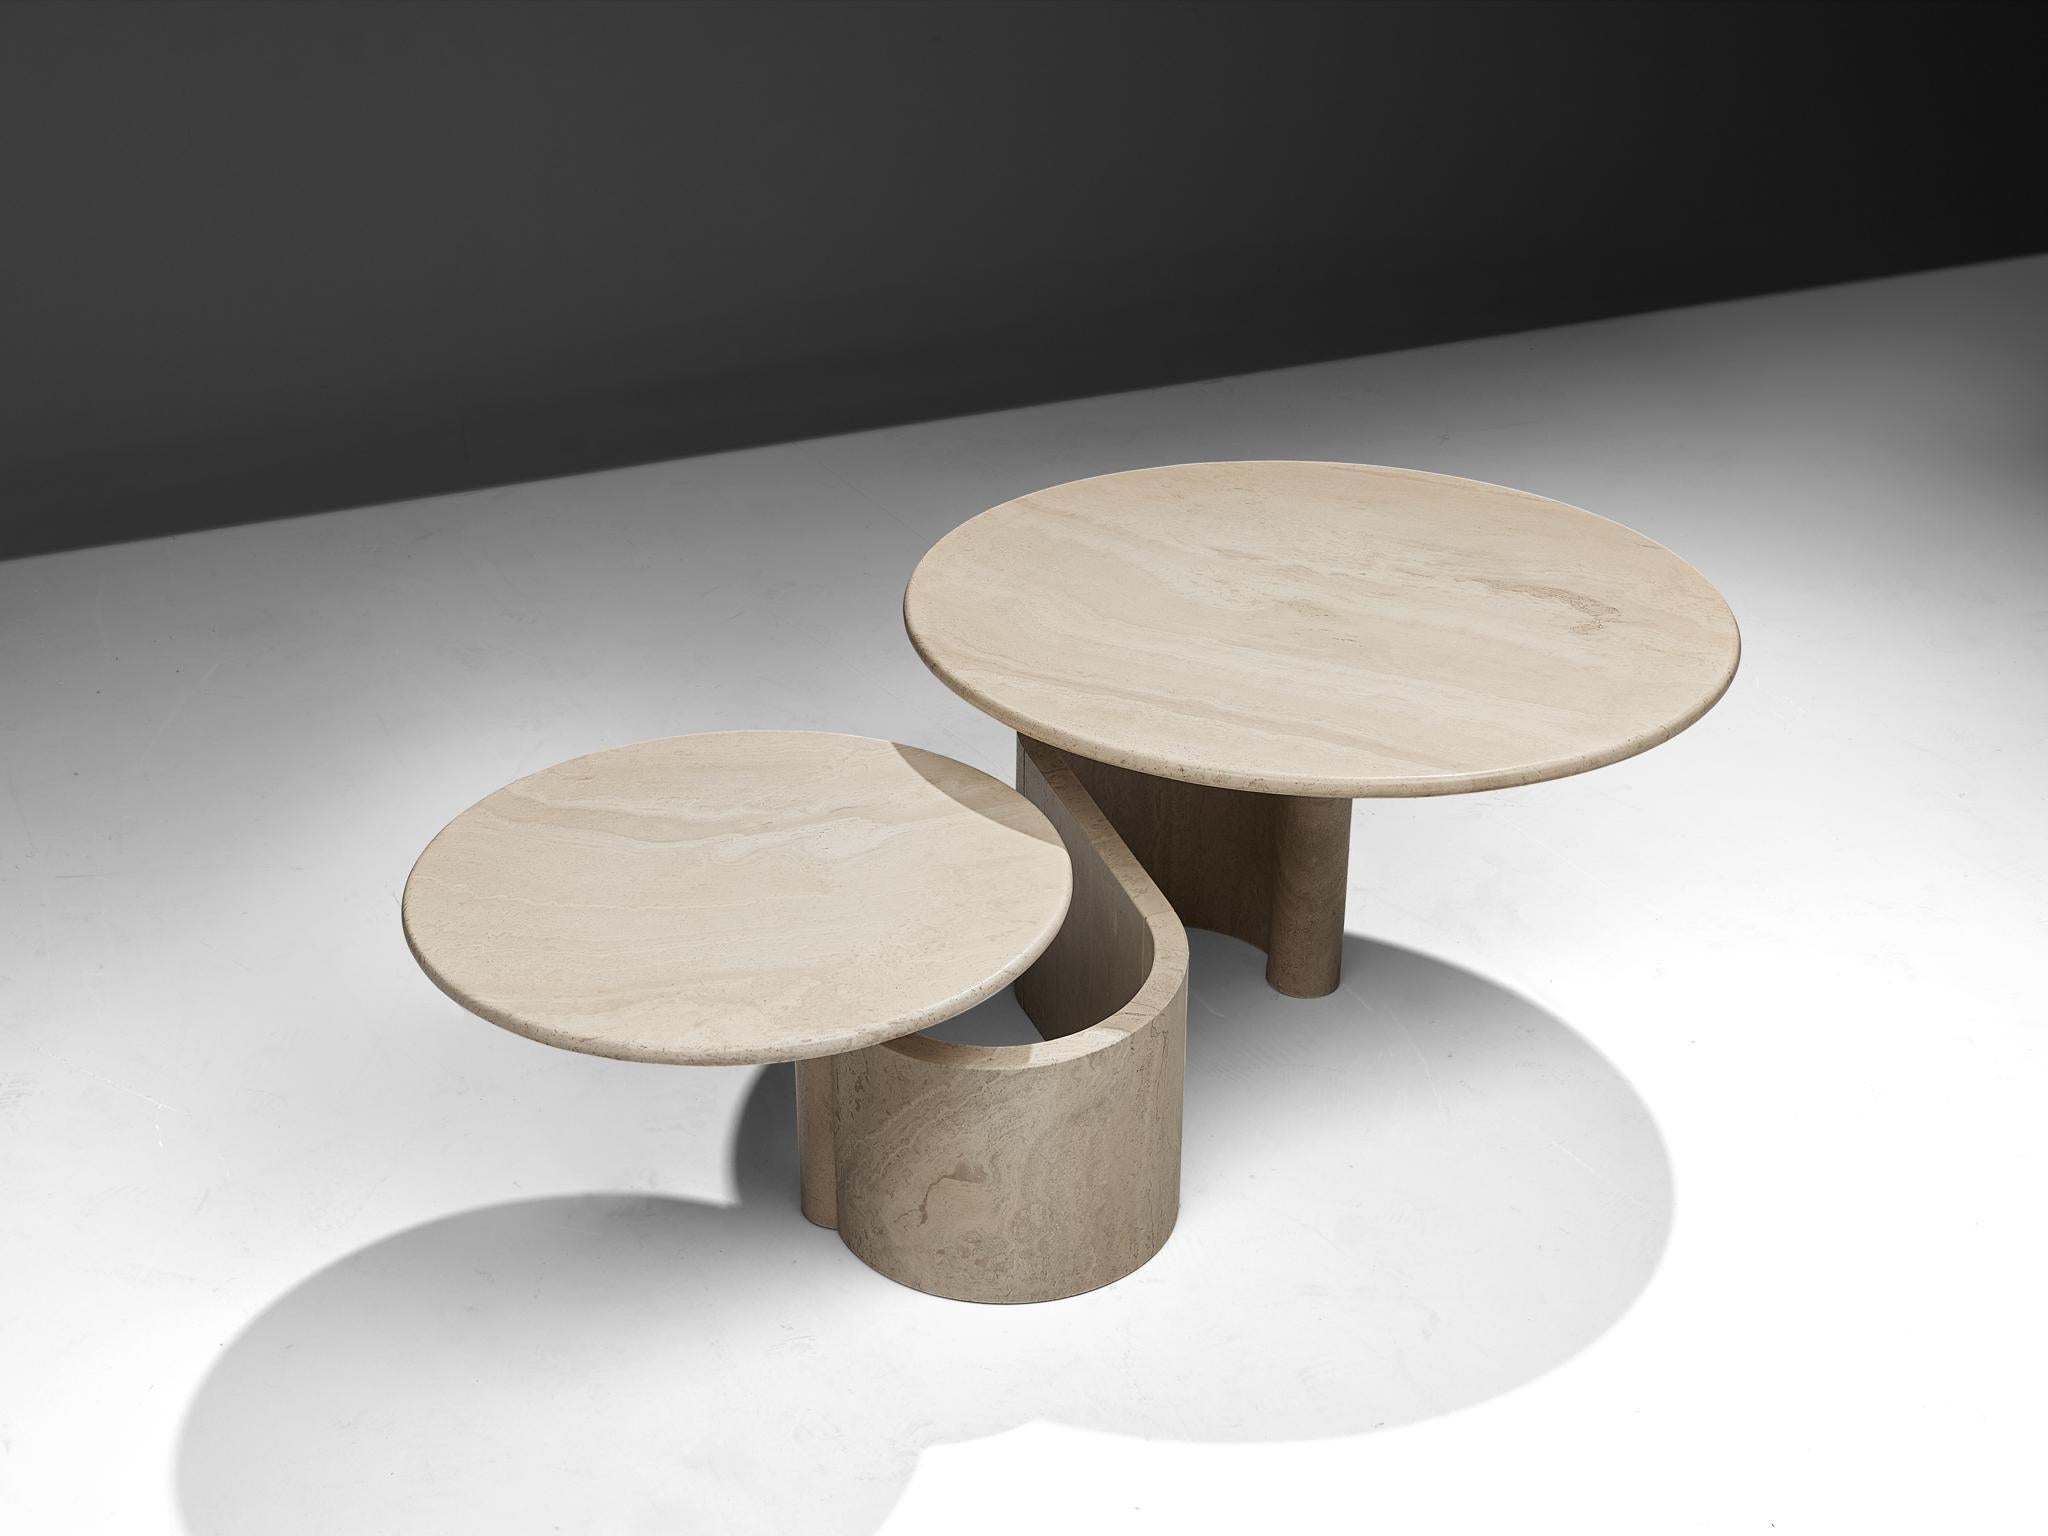 Coffee table, travertine and metal, Italy, 1970s.

A sculptural cocktail table with two tabletops executed in travertine. The base consists of a meandering freeform 